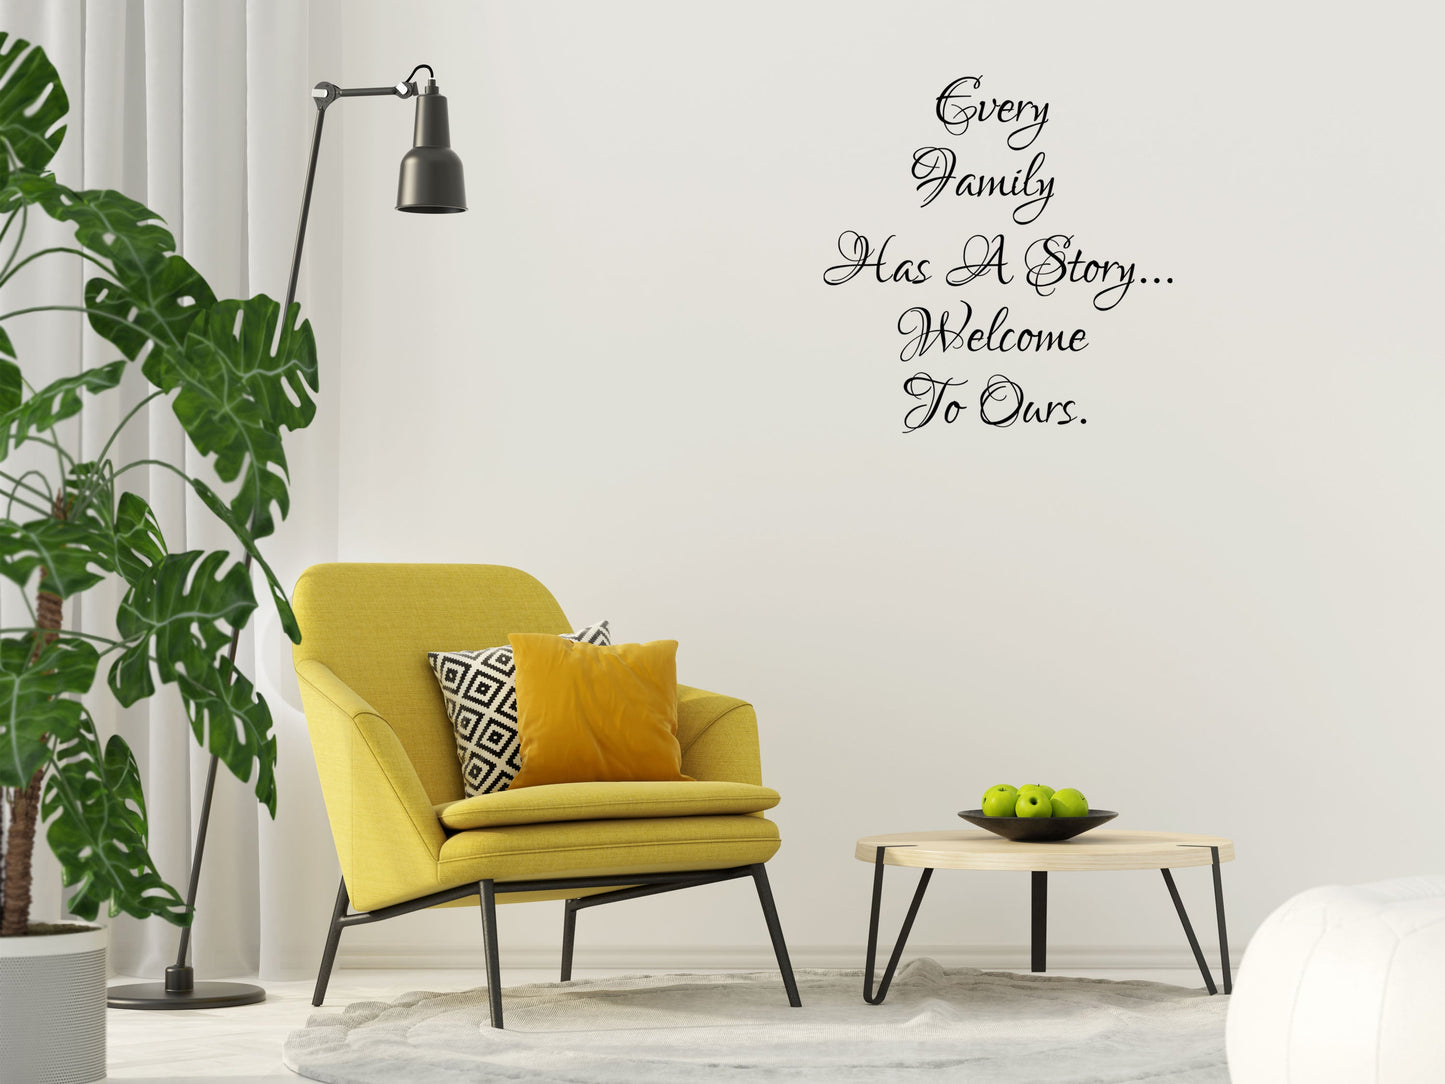 Every Family Has A Story Vinyl Wall Decal Inspirational Wall Signs 